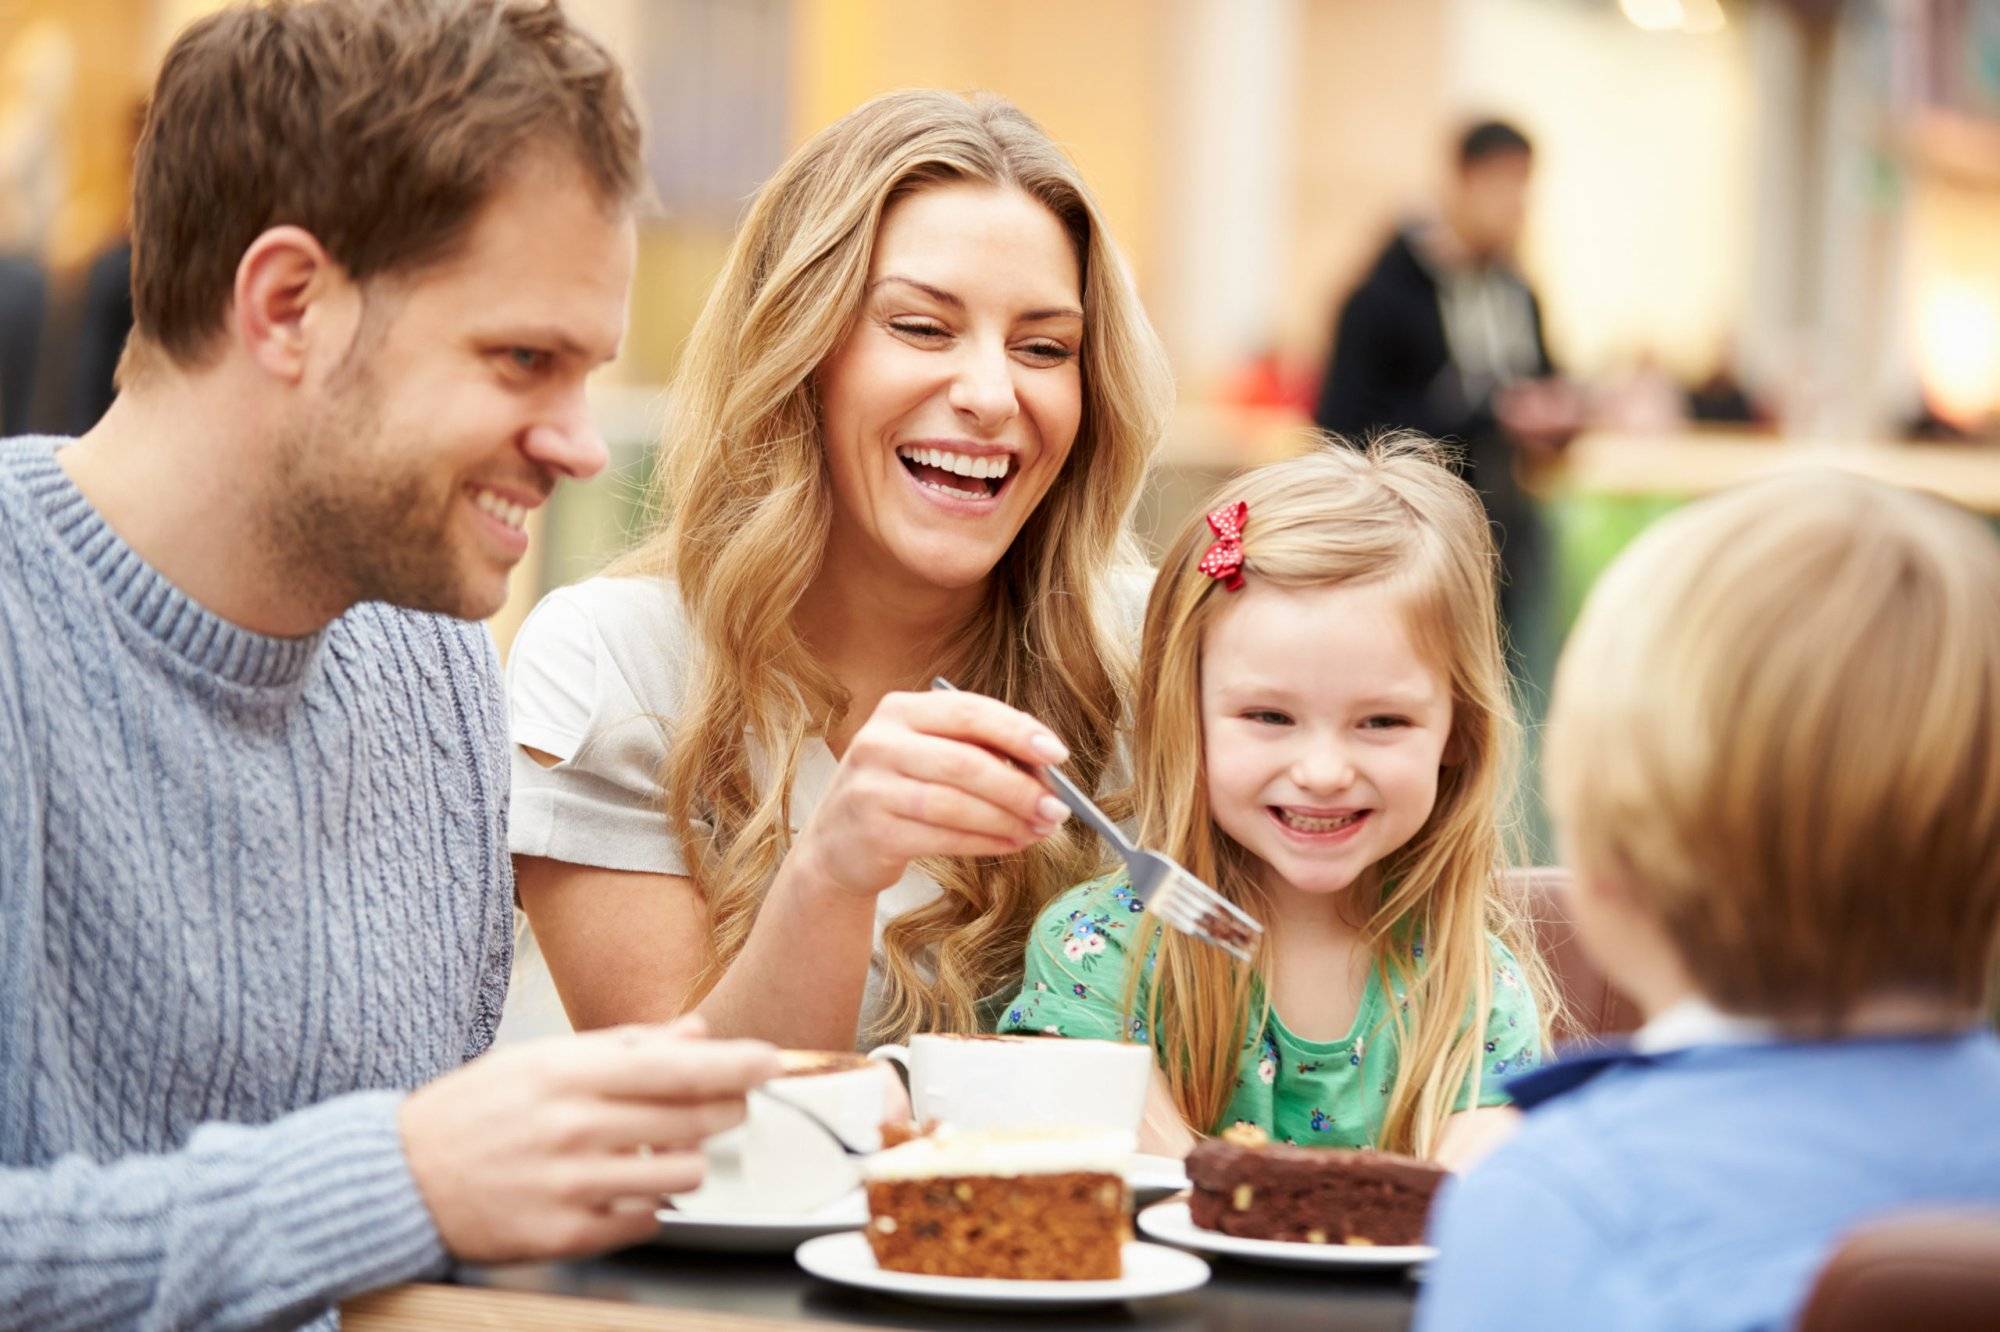 Family Enjoying Snack In Café Together